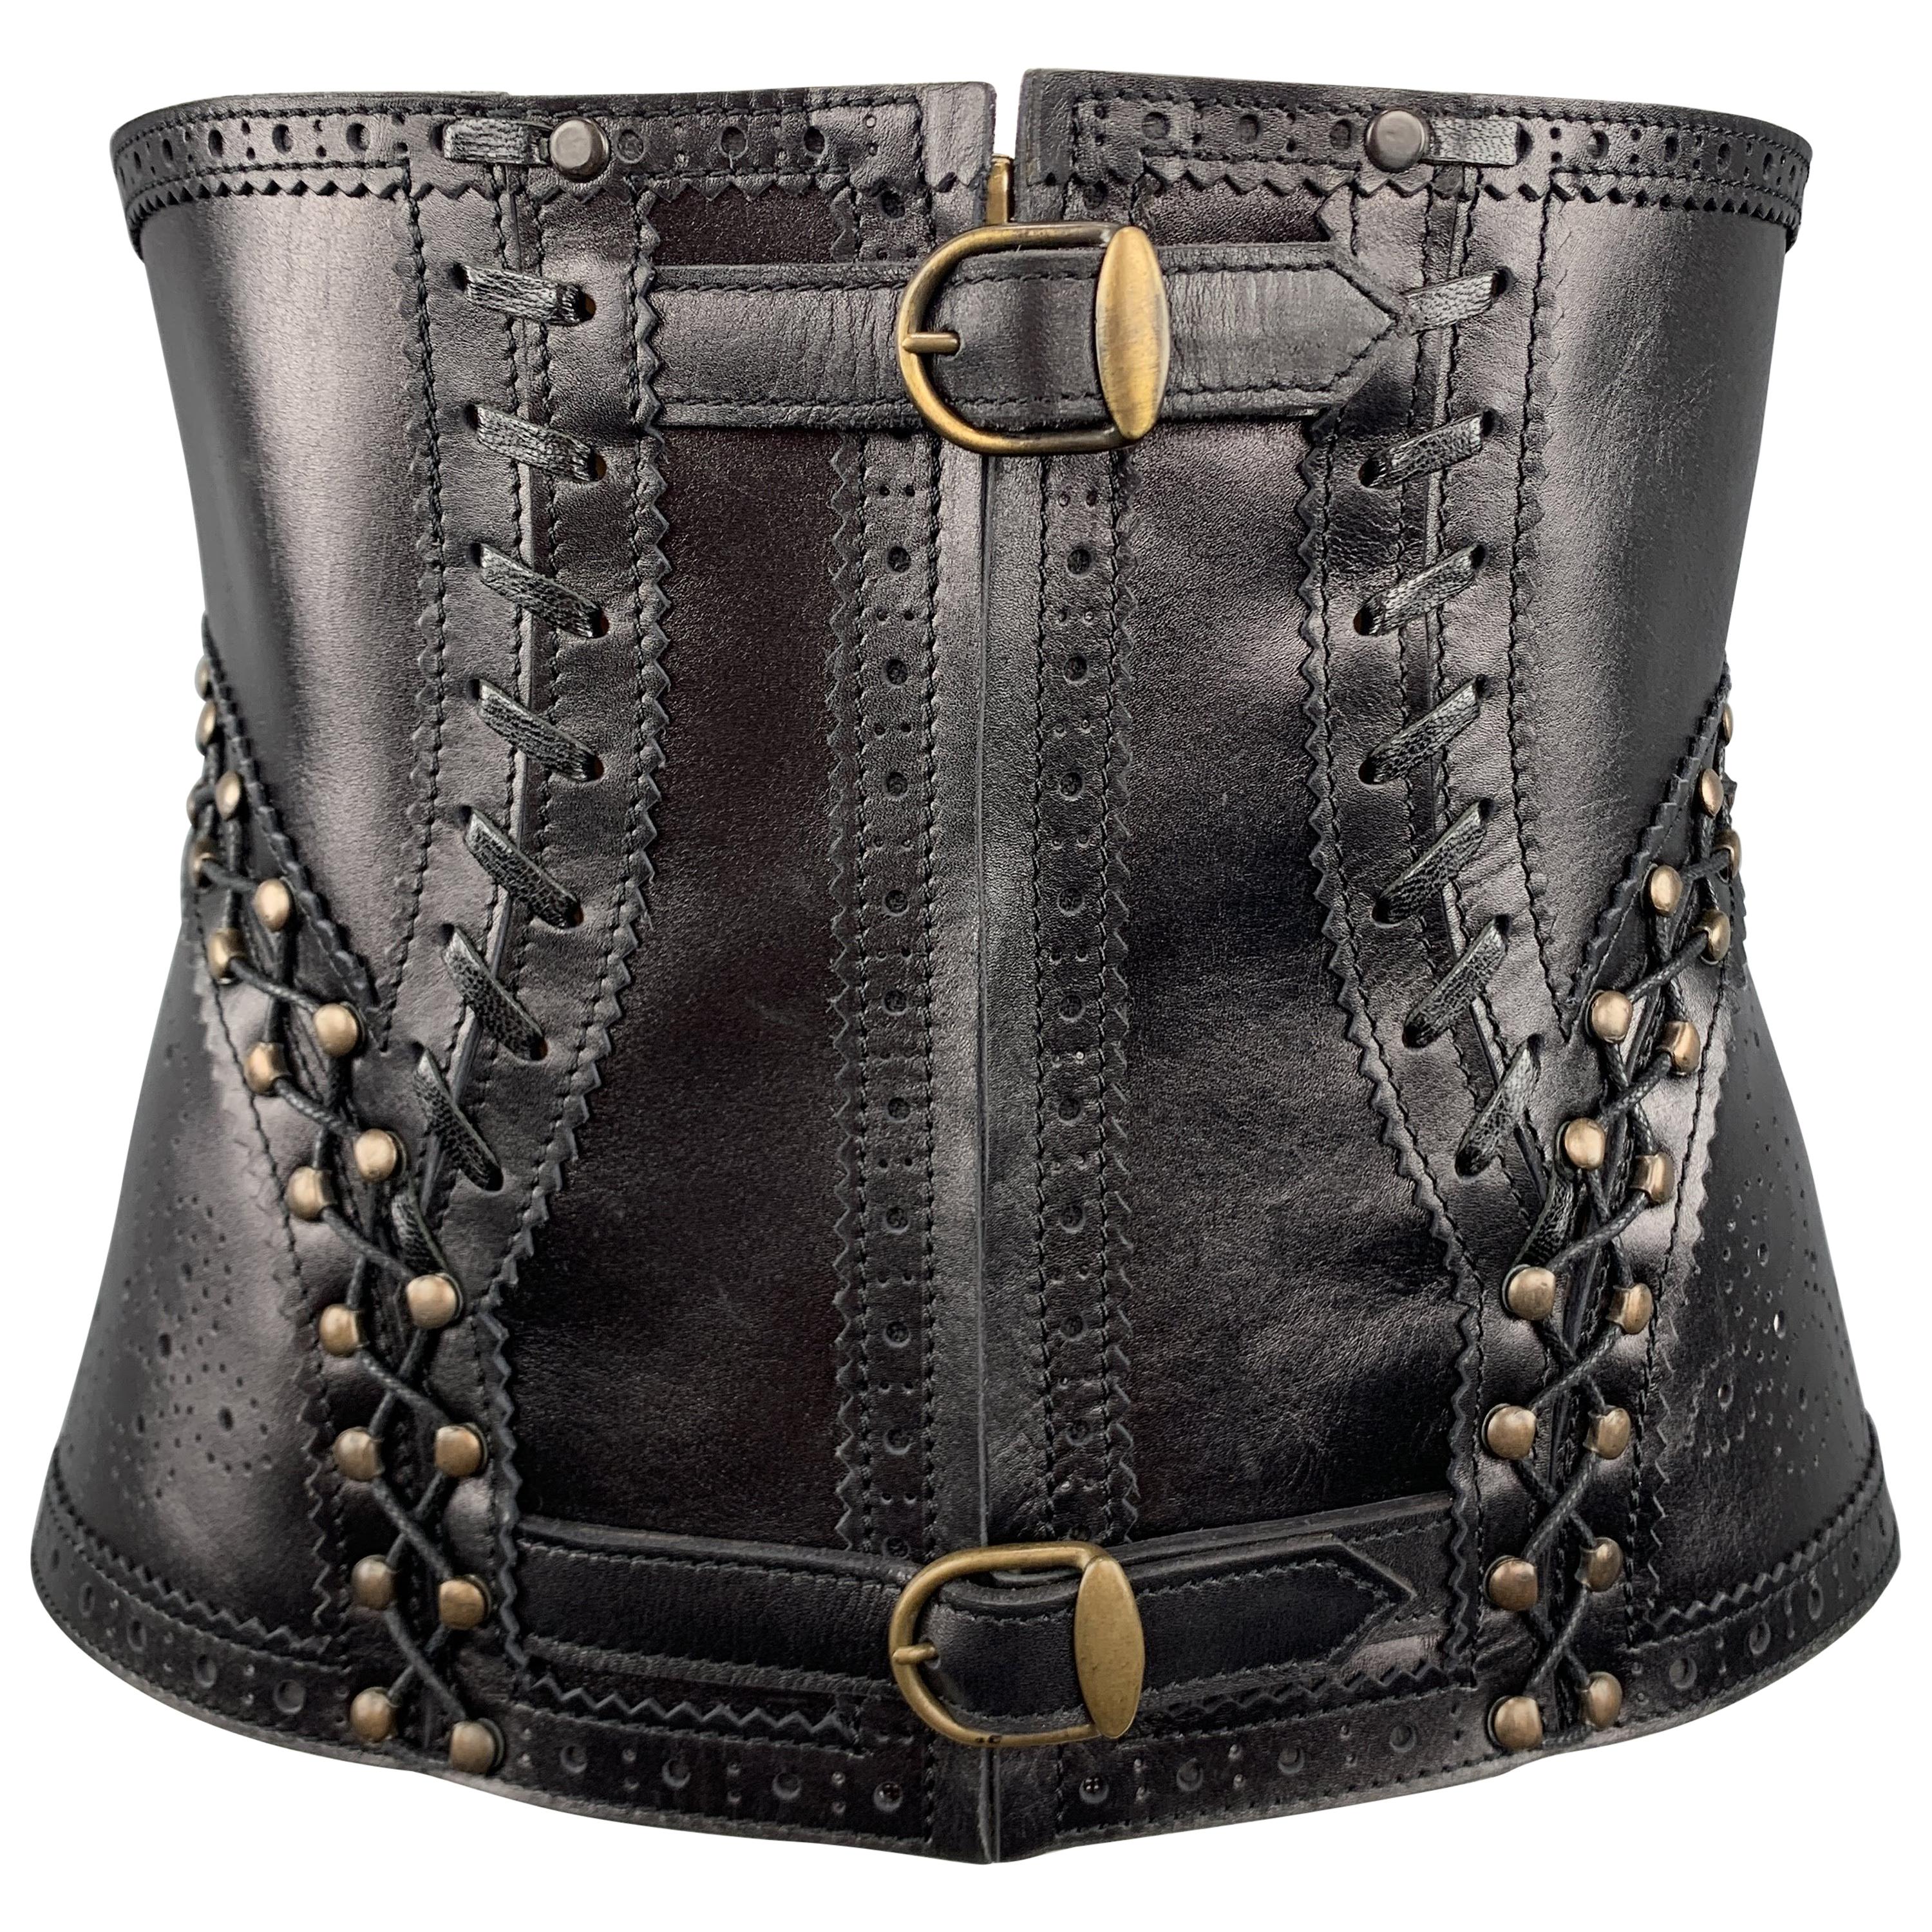 JEAN PAUL GAULTIER Black Leather Perforated Lace Up Whip Stitch Corset Belt